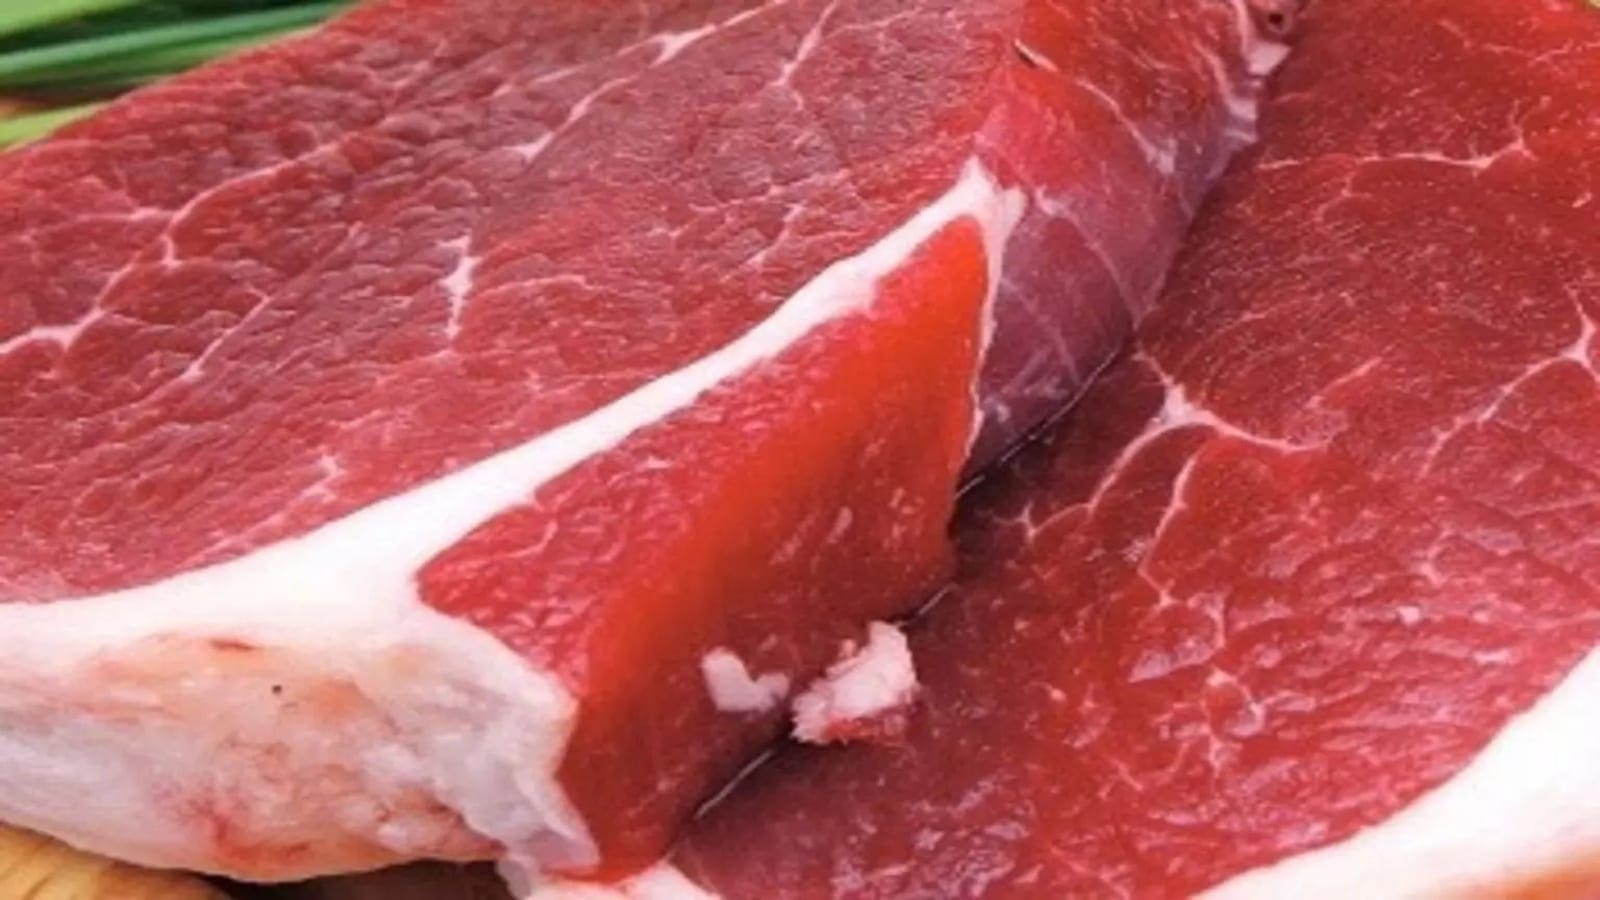 UK increases exports to Ghana, Côte d’Ivoire to satisfy appetite for red meat